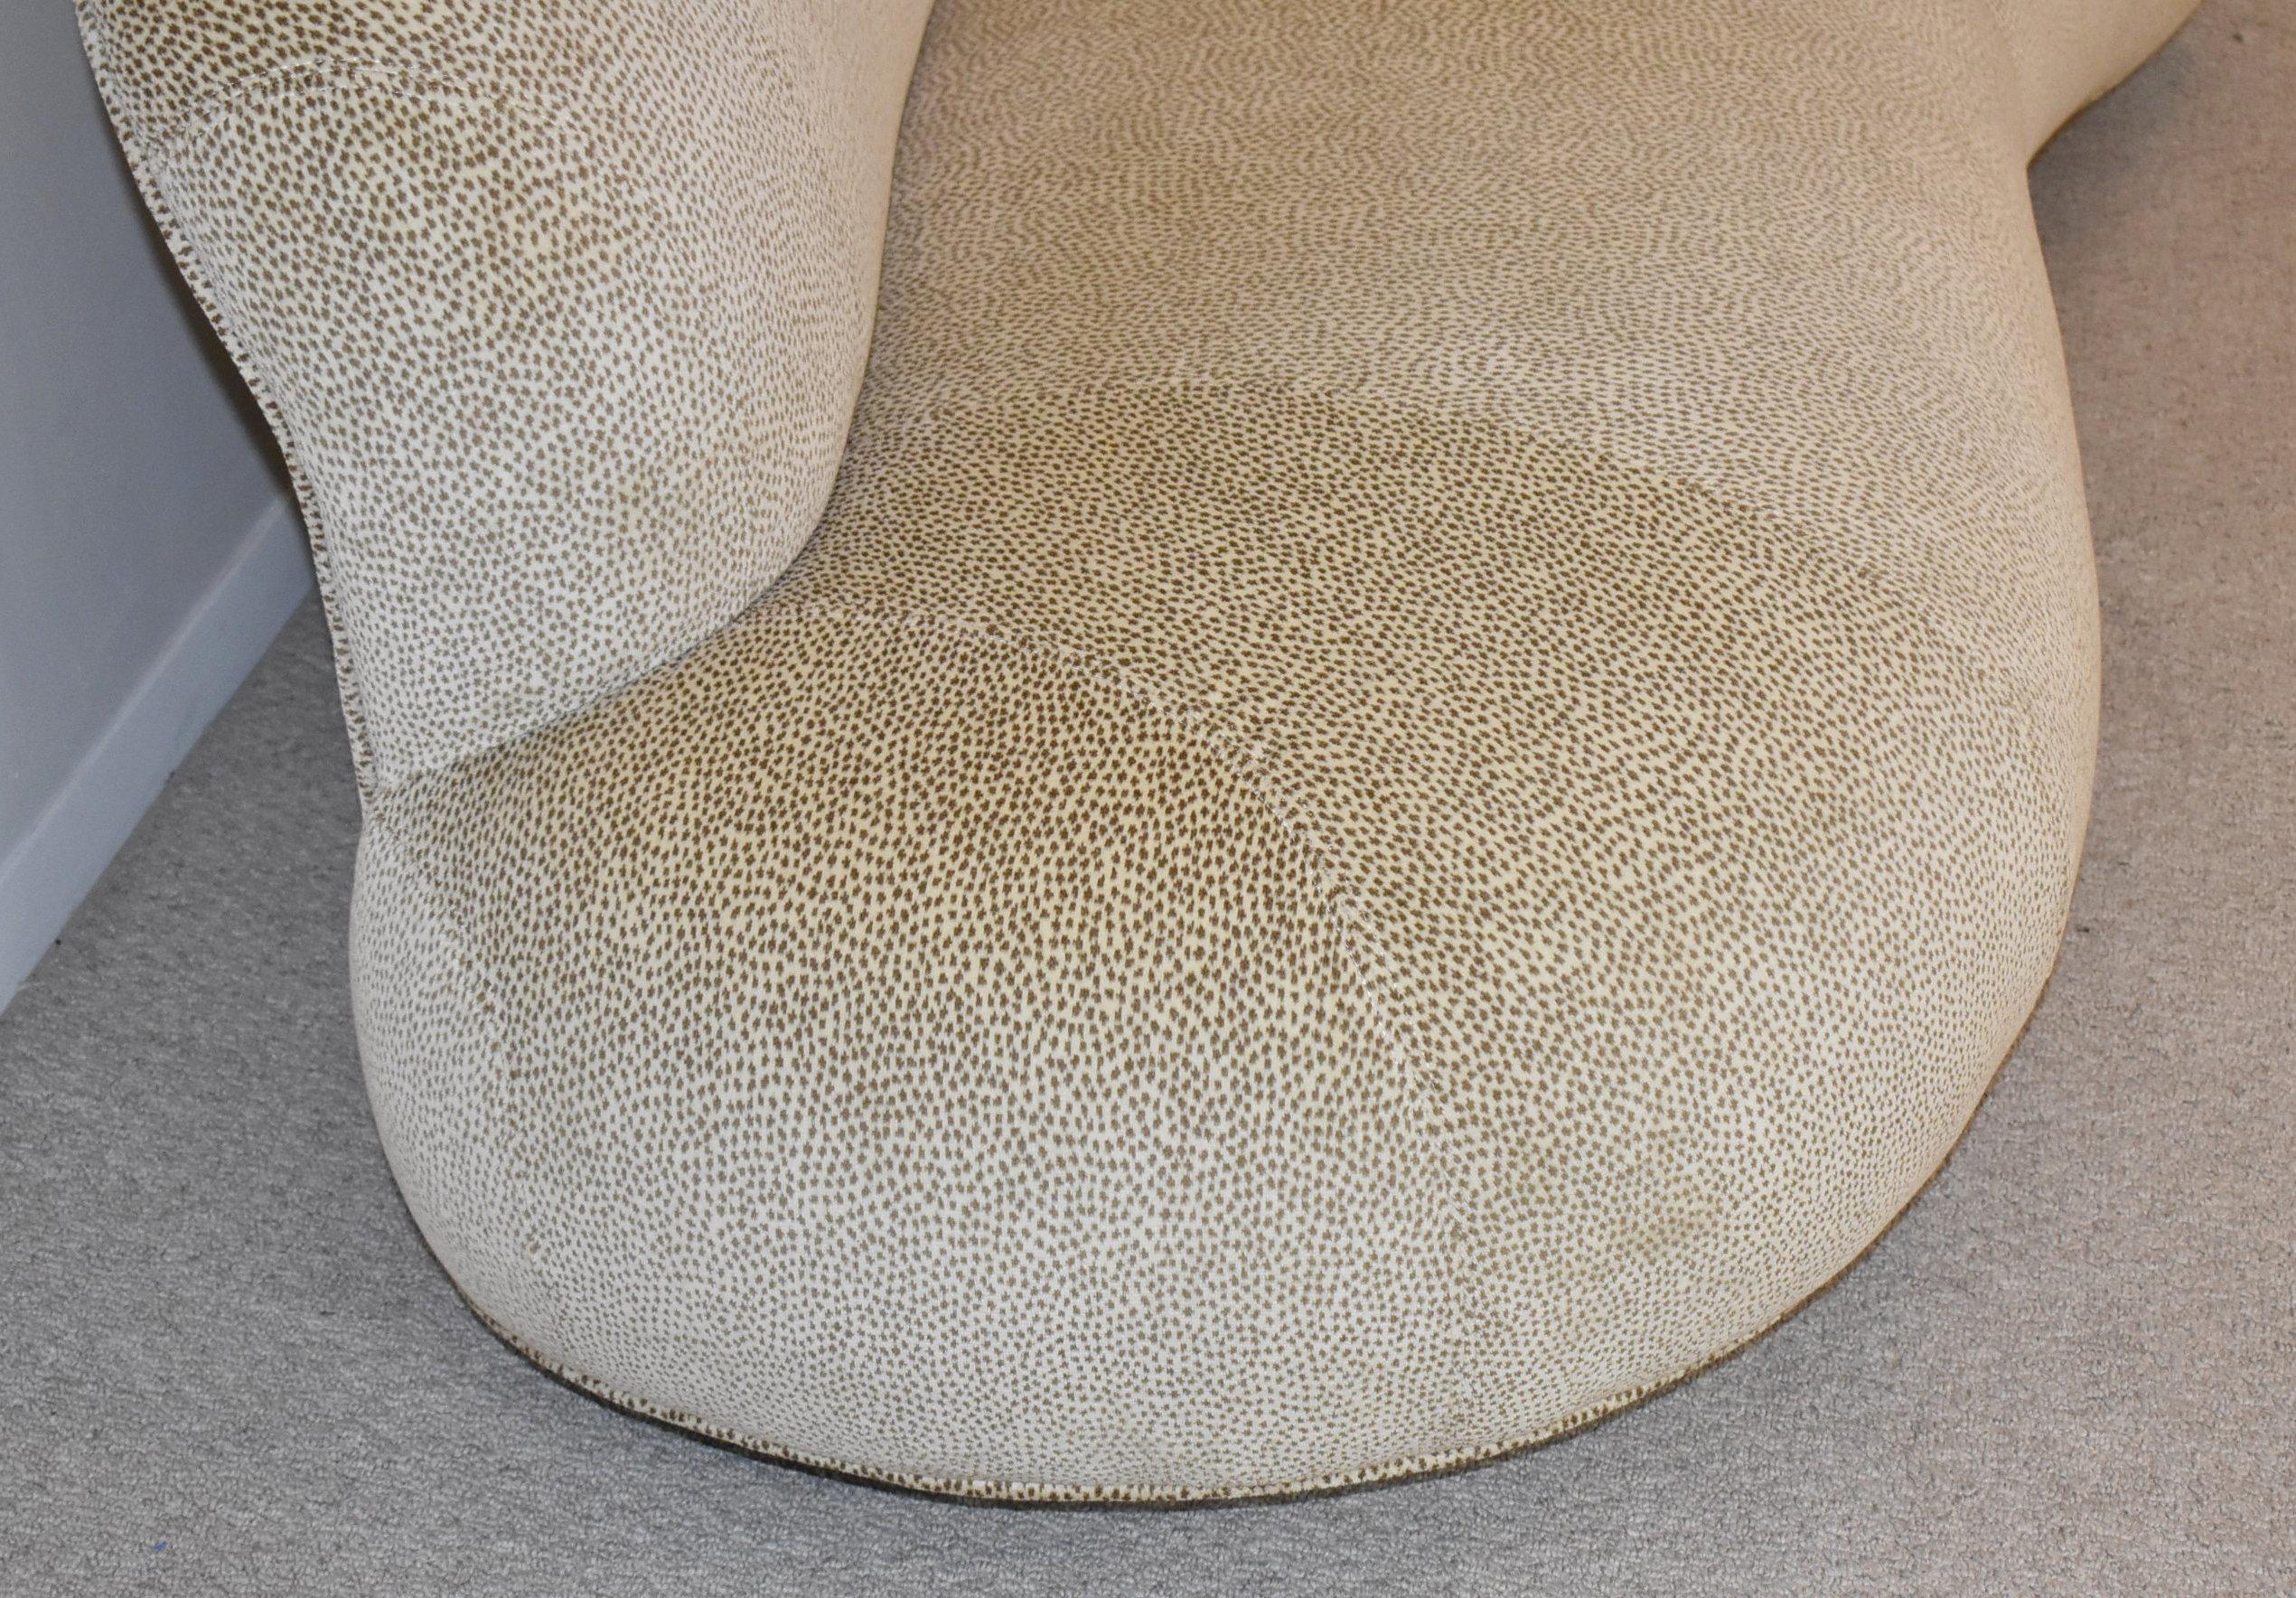 Organic cloud shape sofa circa 1990's by Preview Furniture. Very nice upholstery with small pattern.